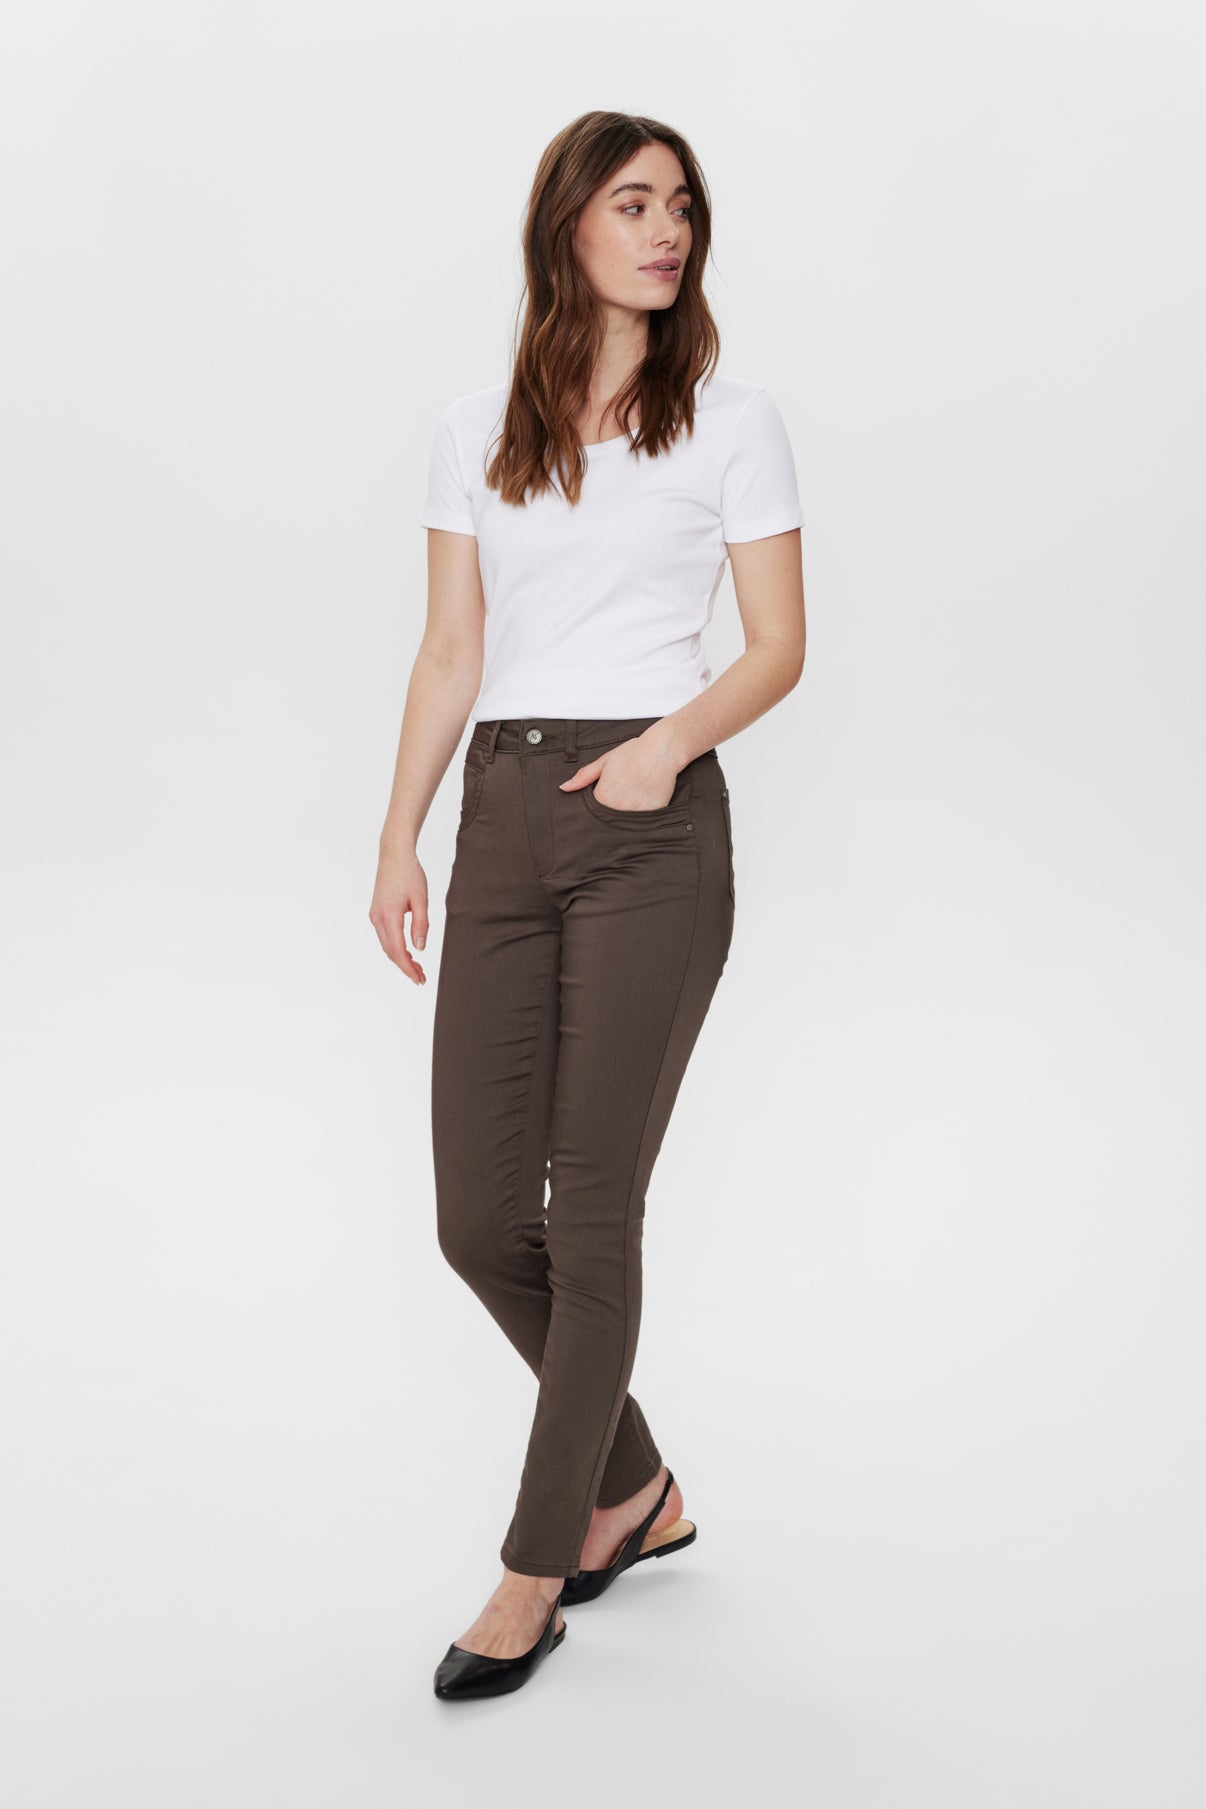 THERESE Pants Rie 9637